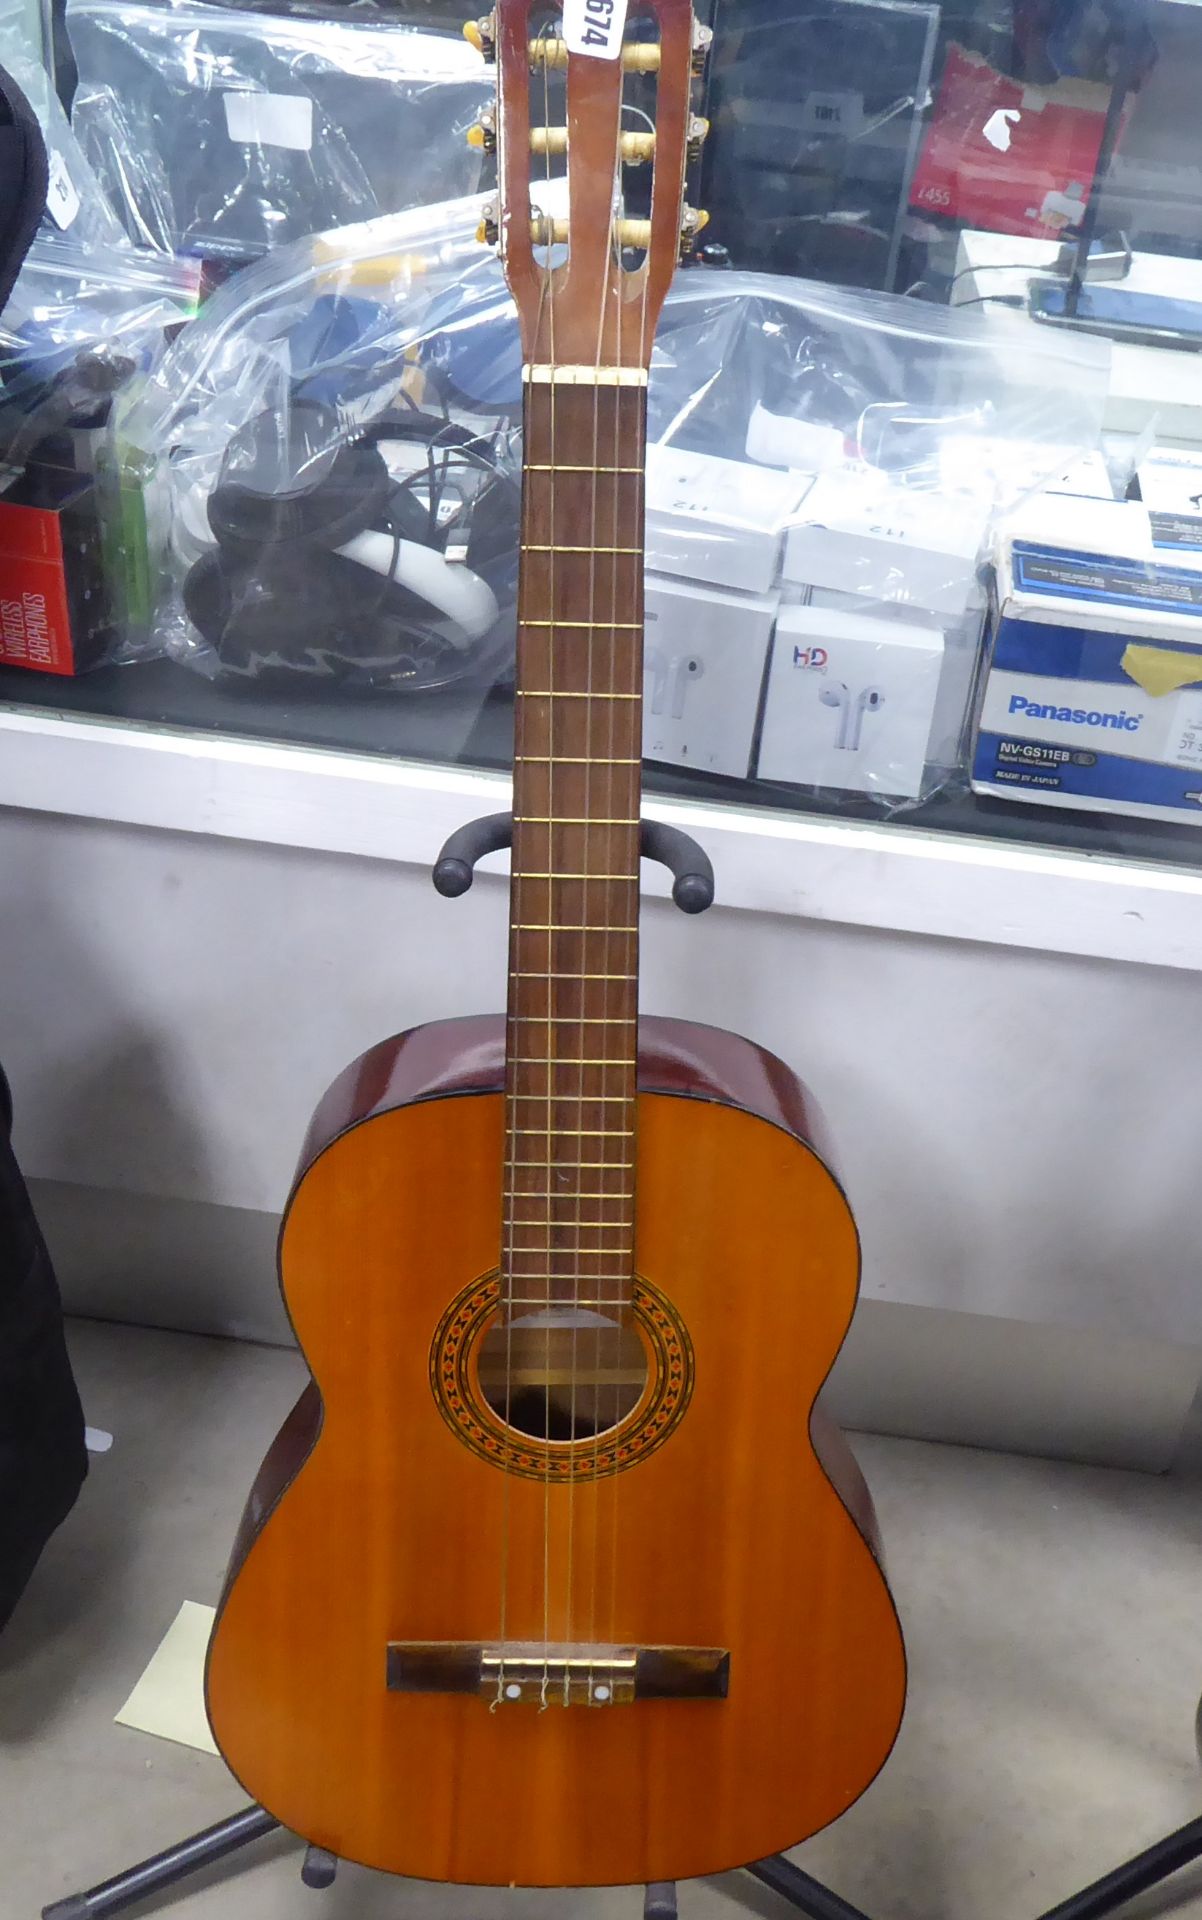 2620 - 6 string acoustic guitar with soft carry case (missing string)